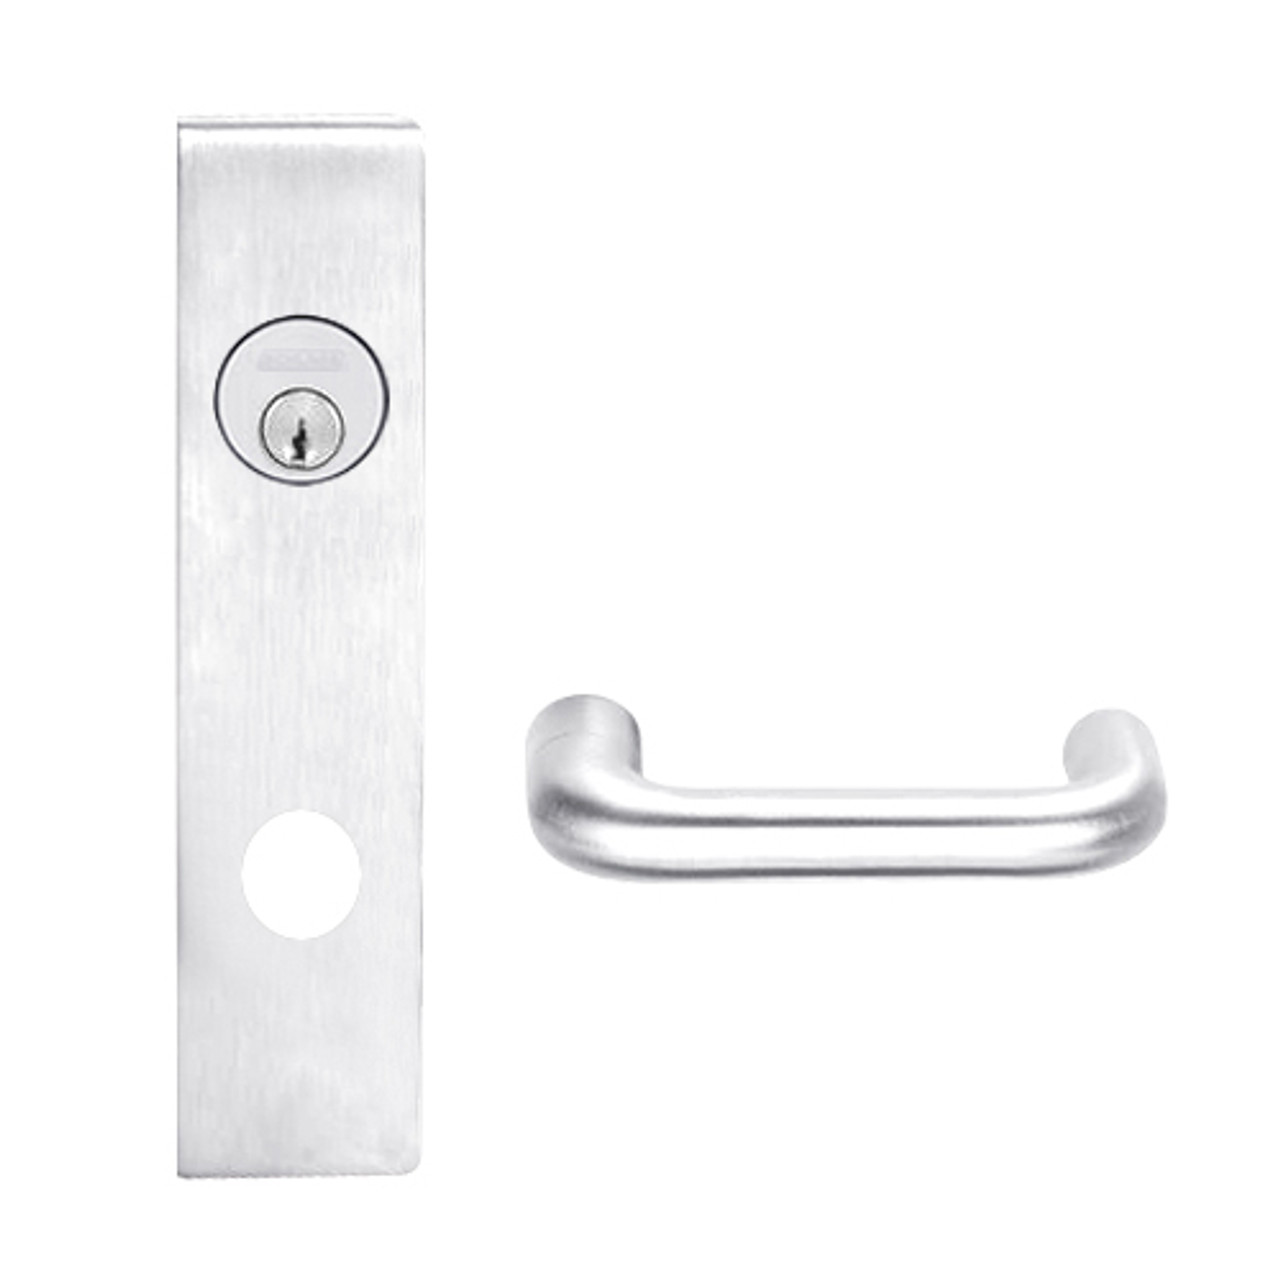 L9456L-03L-625 Schlage L Series Less Cylinder Corridor with Deadbolt Commercial Mortise Lock with 03 Cast Lever Design in Bright Chrome